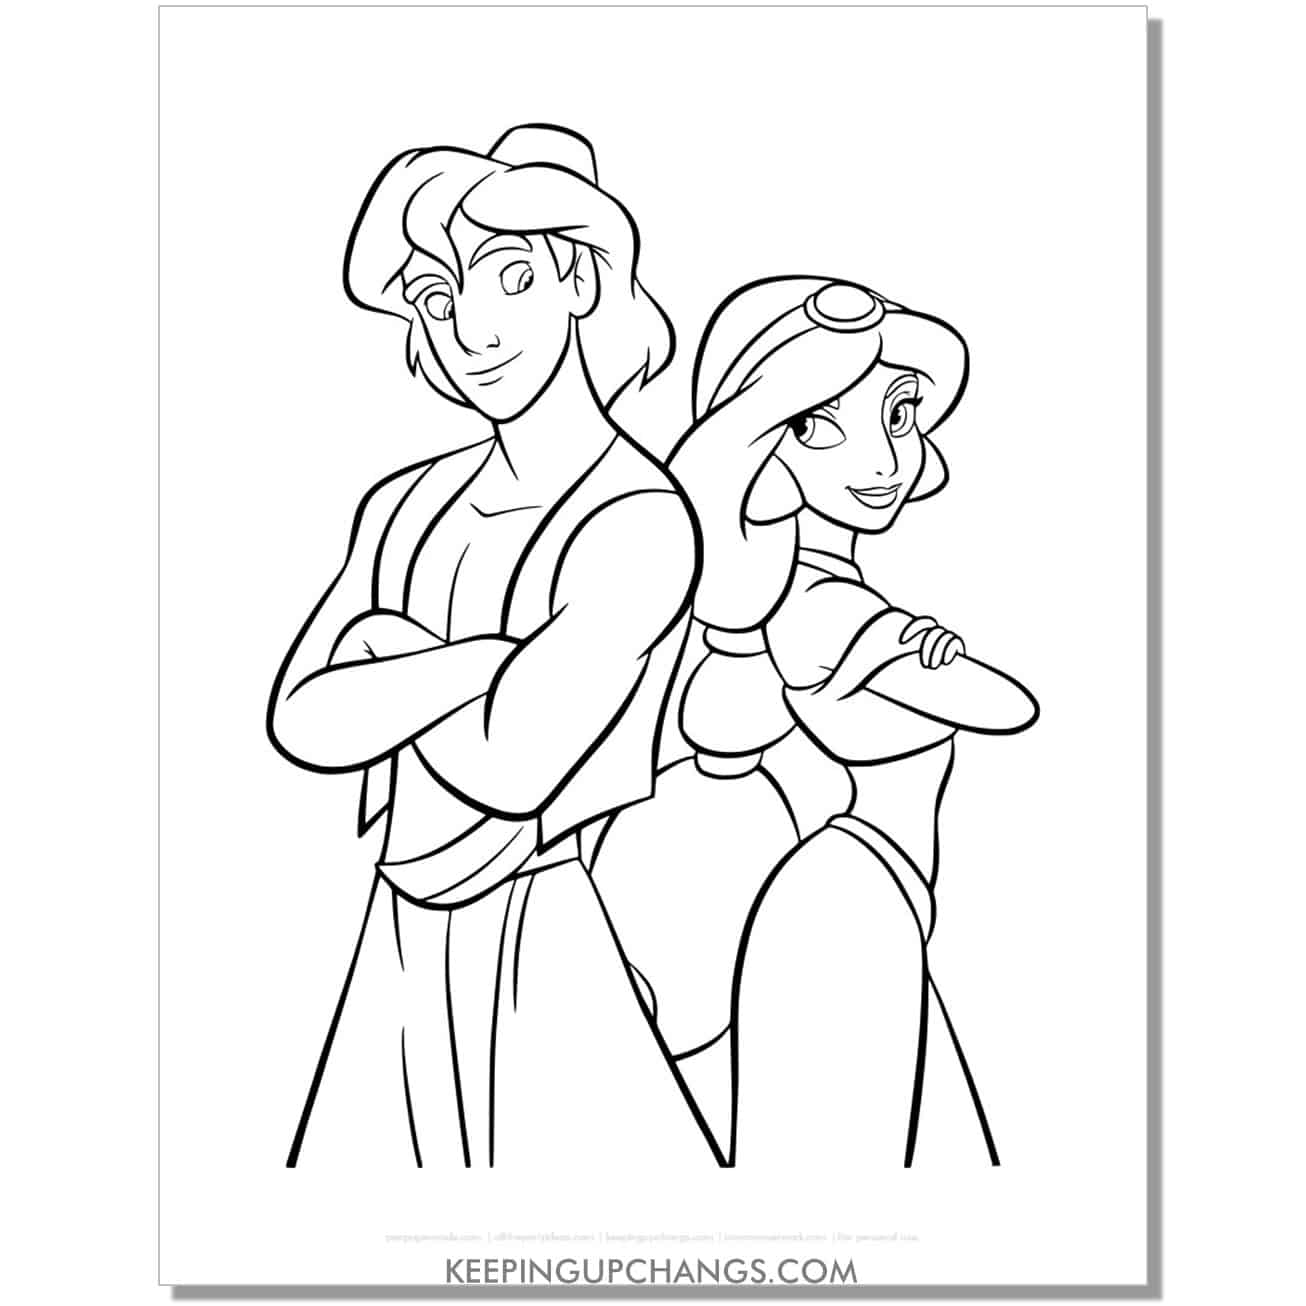 jasmine, aladdin with arms crossed, backs together coloring page, sheet.